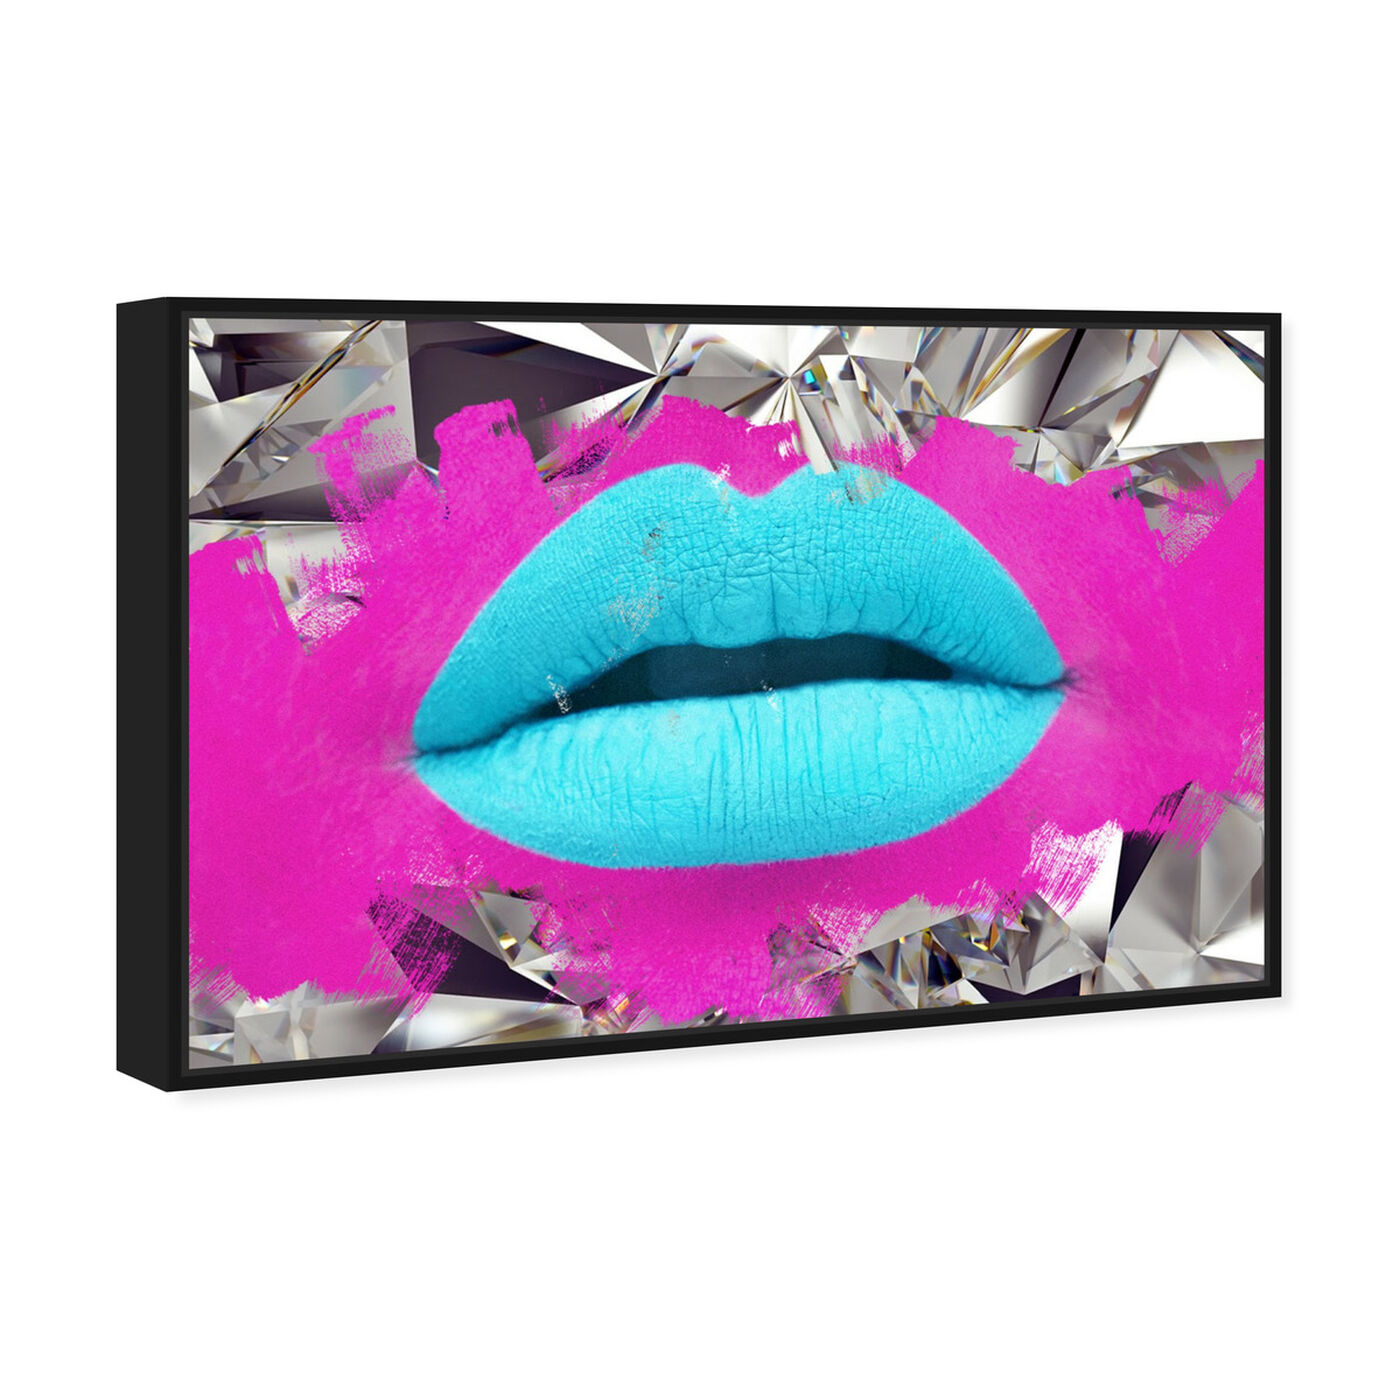 Angled view of Androkiss featuring fashion and glam and lips art.